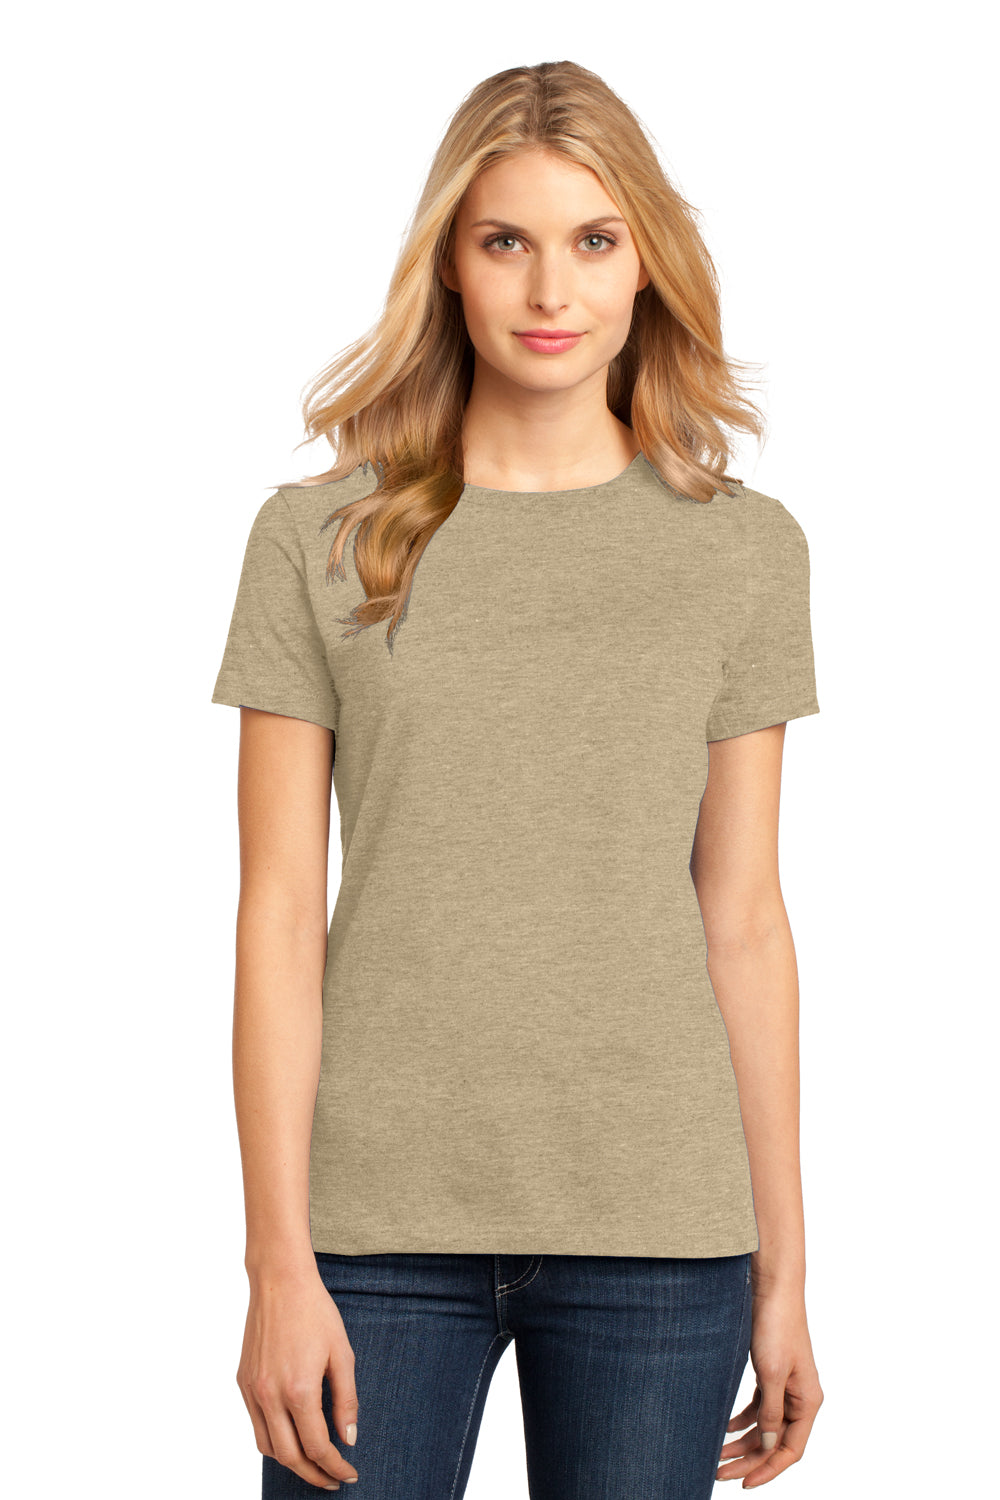 District DM104L Womens Perfect Weight Short Sleeve Crewneck T-Shirt Heather Latte Brown Front